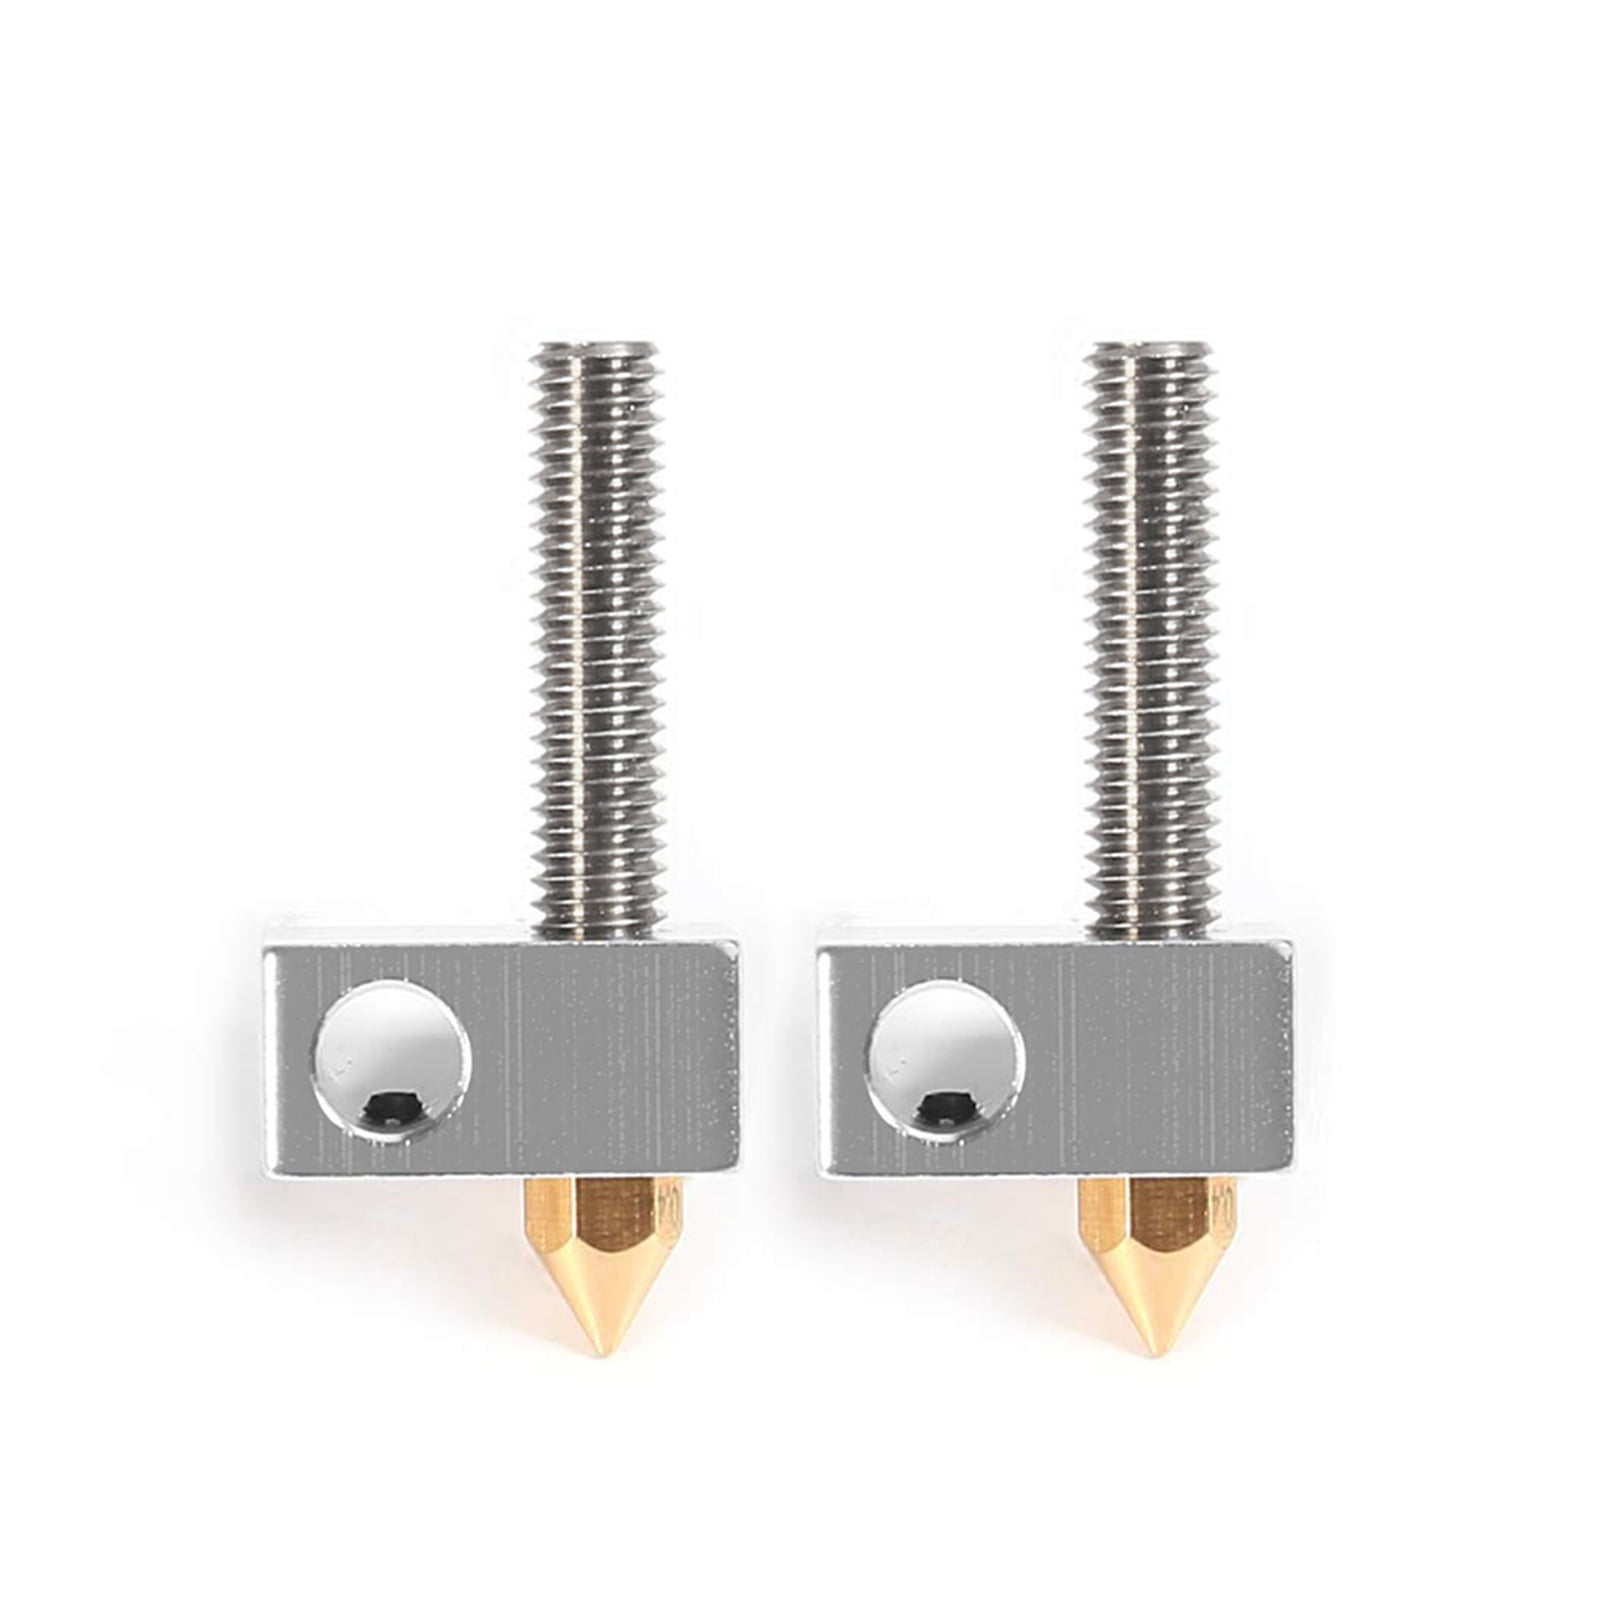 2PCS Creality 3D CR-X 0.4 MM Hotend Extruder Nozzle For 3D Printer 